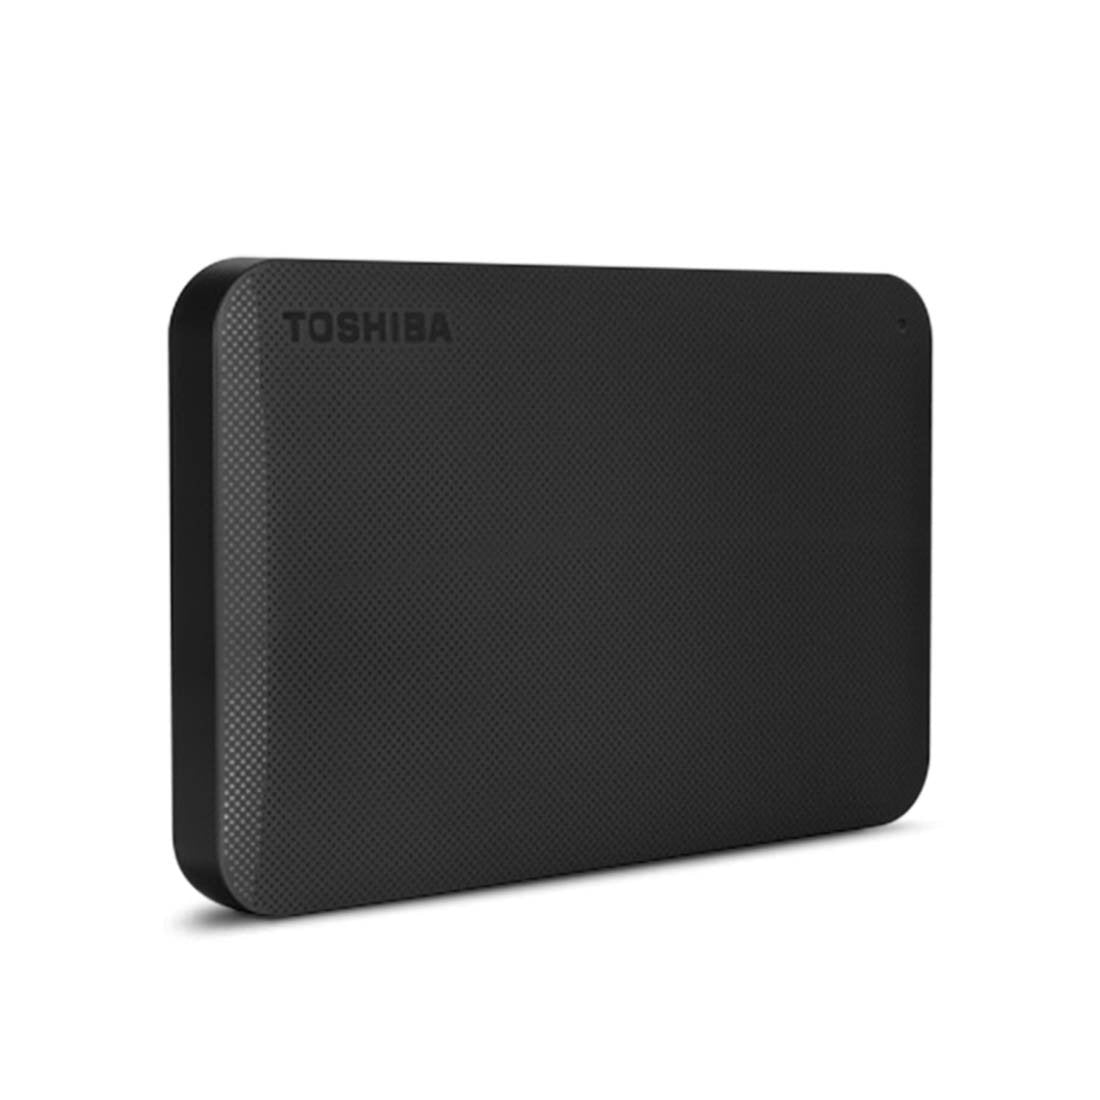 Toshiba Canvio Ready 4TB 2.5 Inch Portable Hard Drive with SuperSpeed USB 3.0